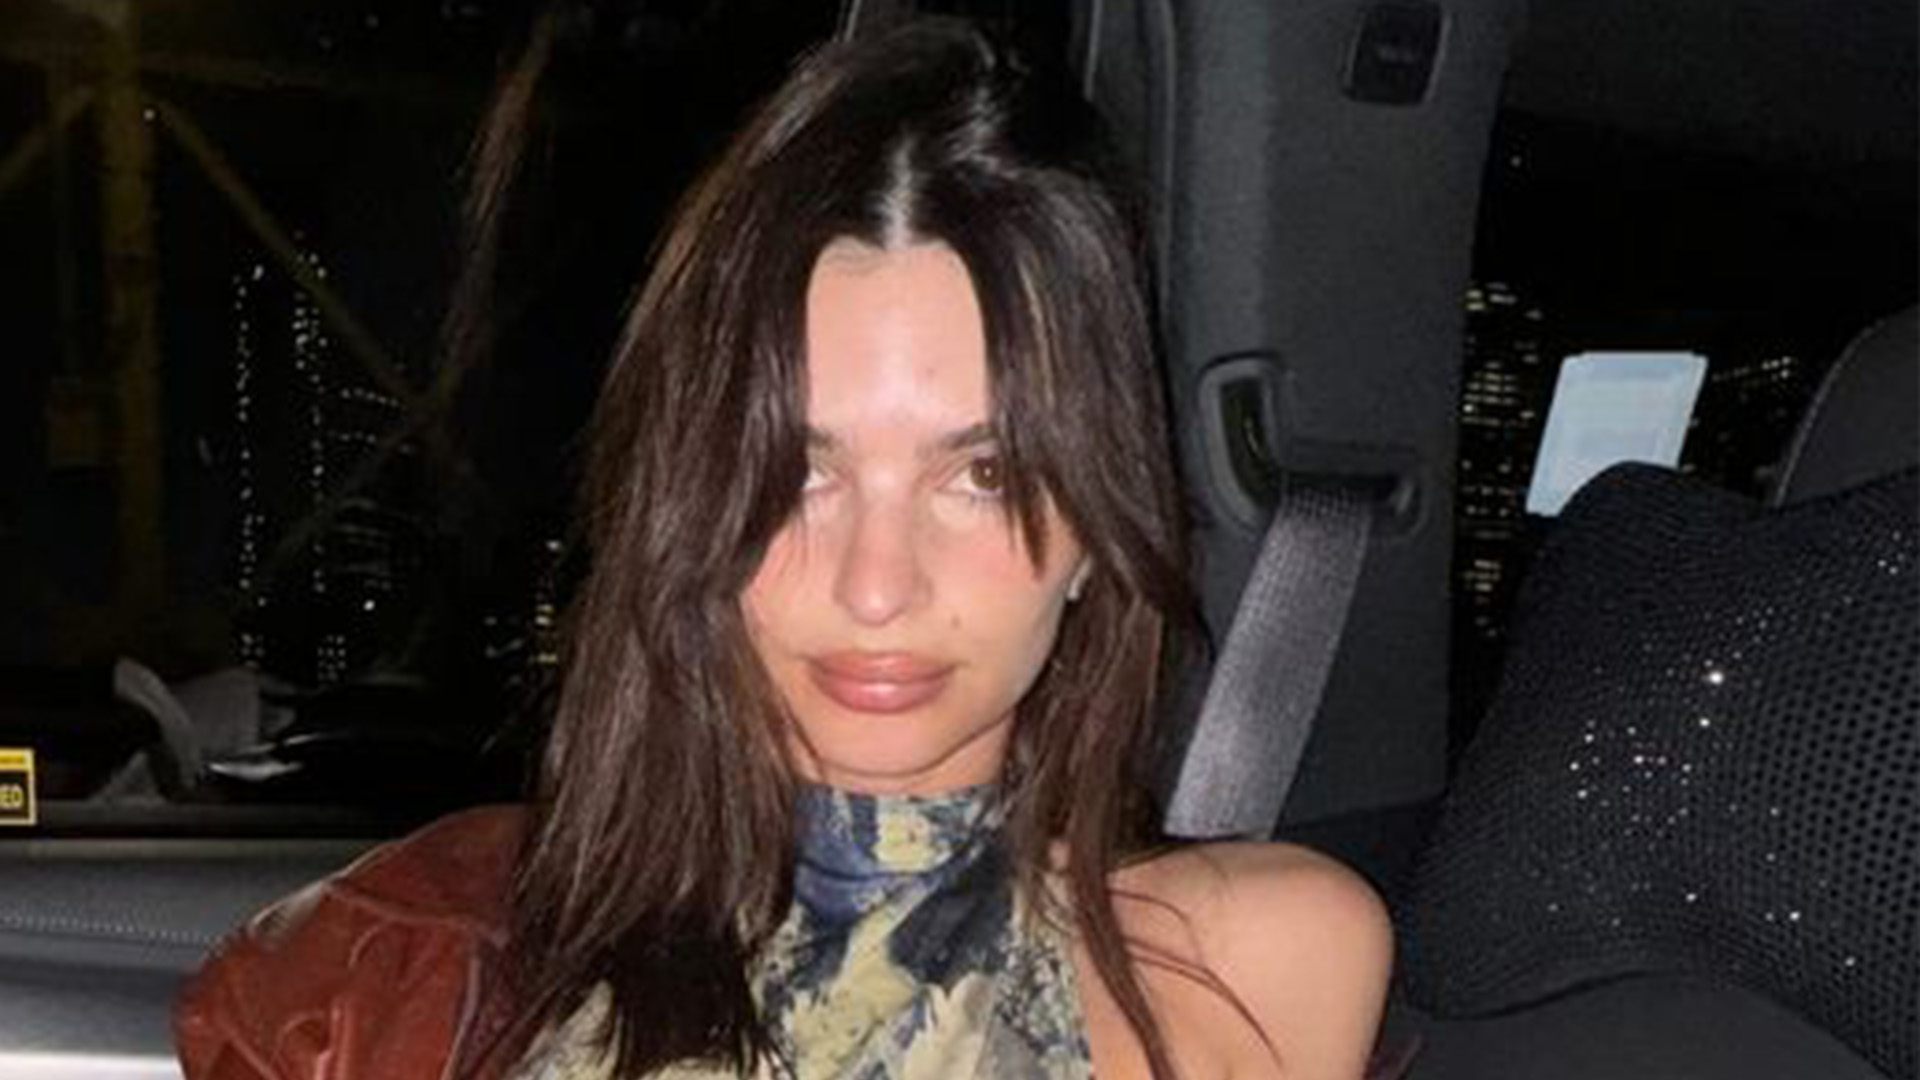 Emily Ratajkowski accused of getting fillers after the model looks ‘so much younger’ and ‘unrecognizable’ during NYFW